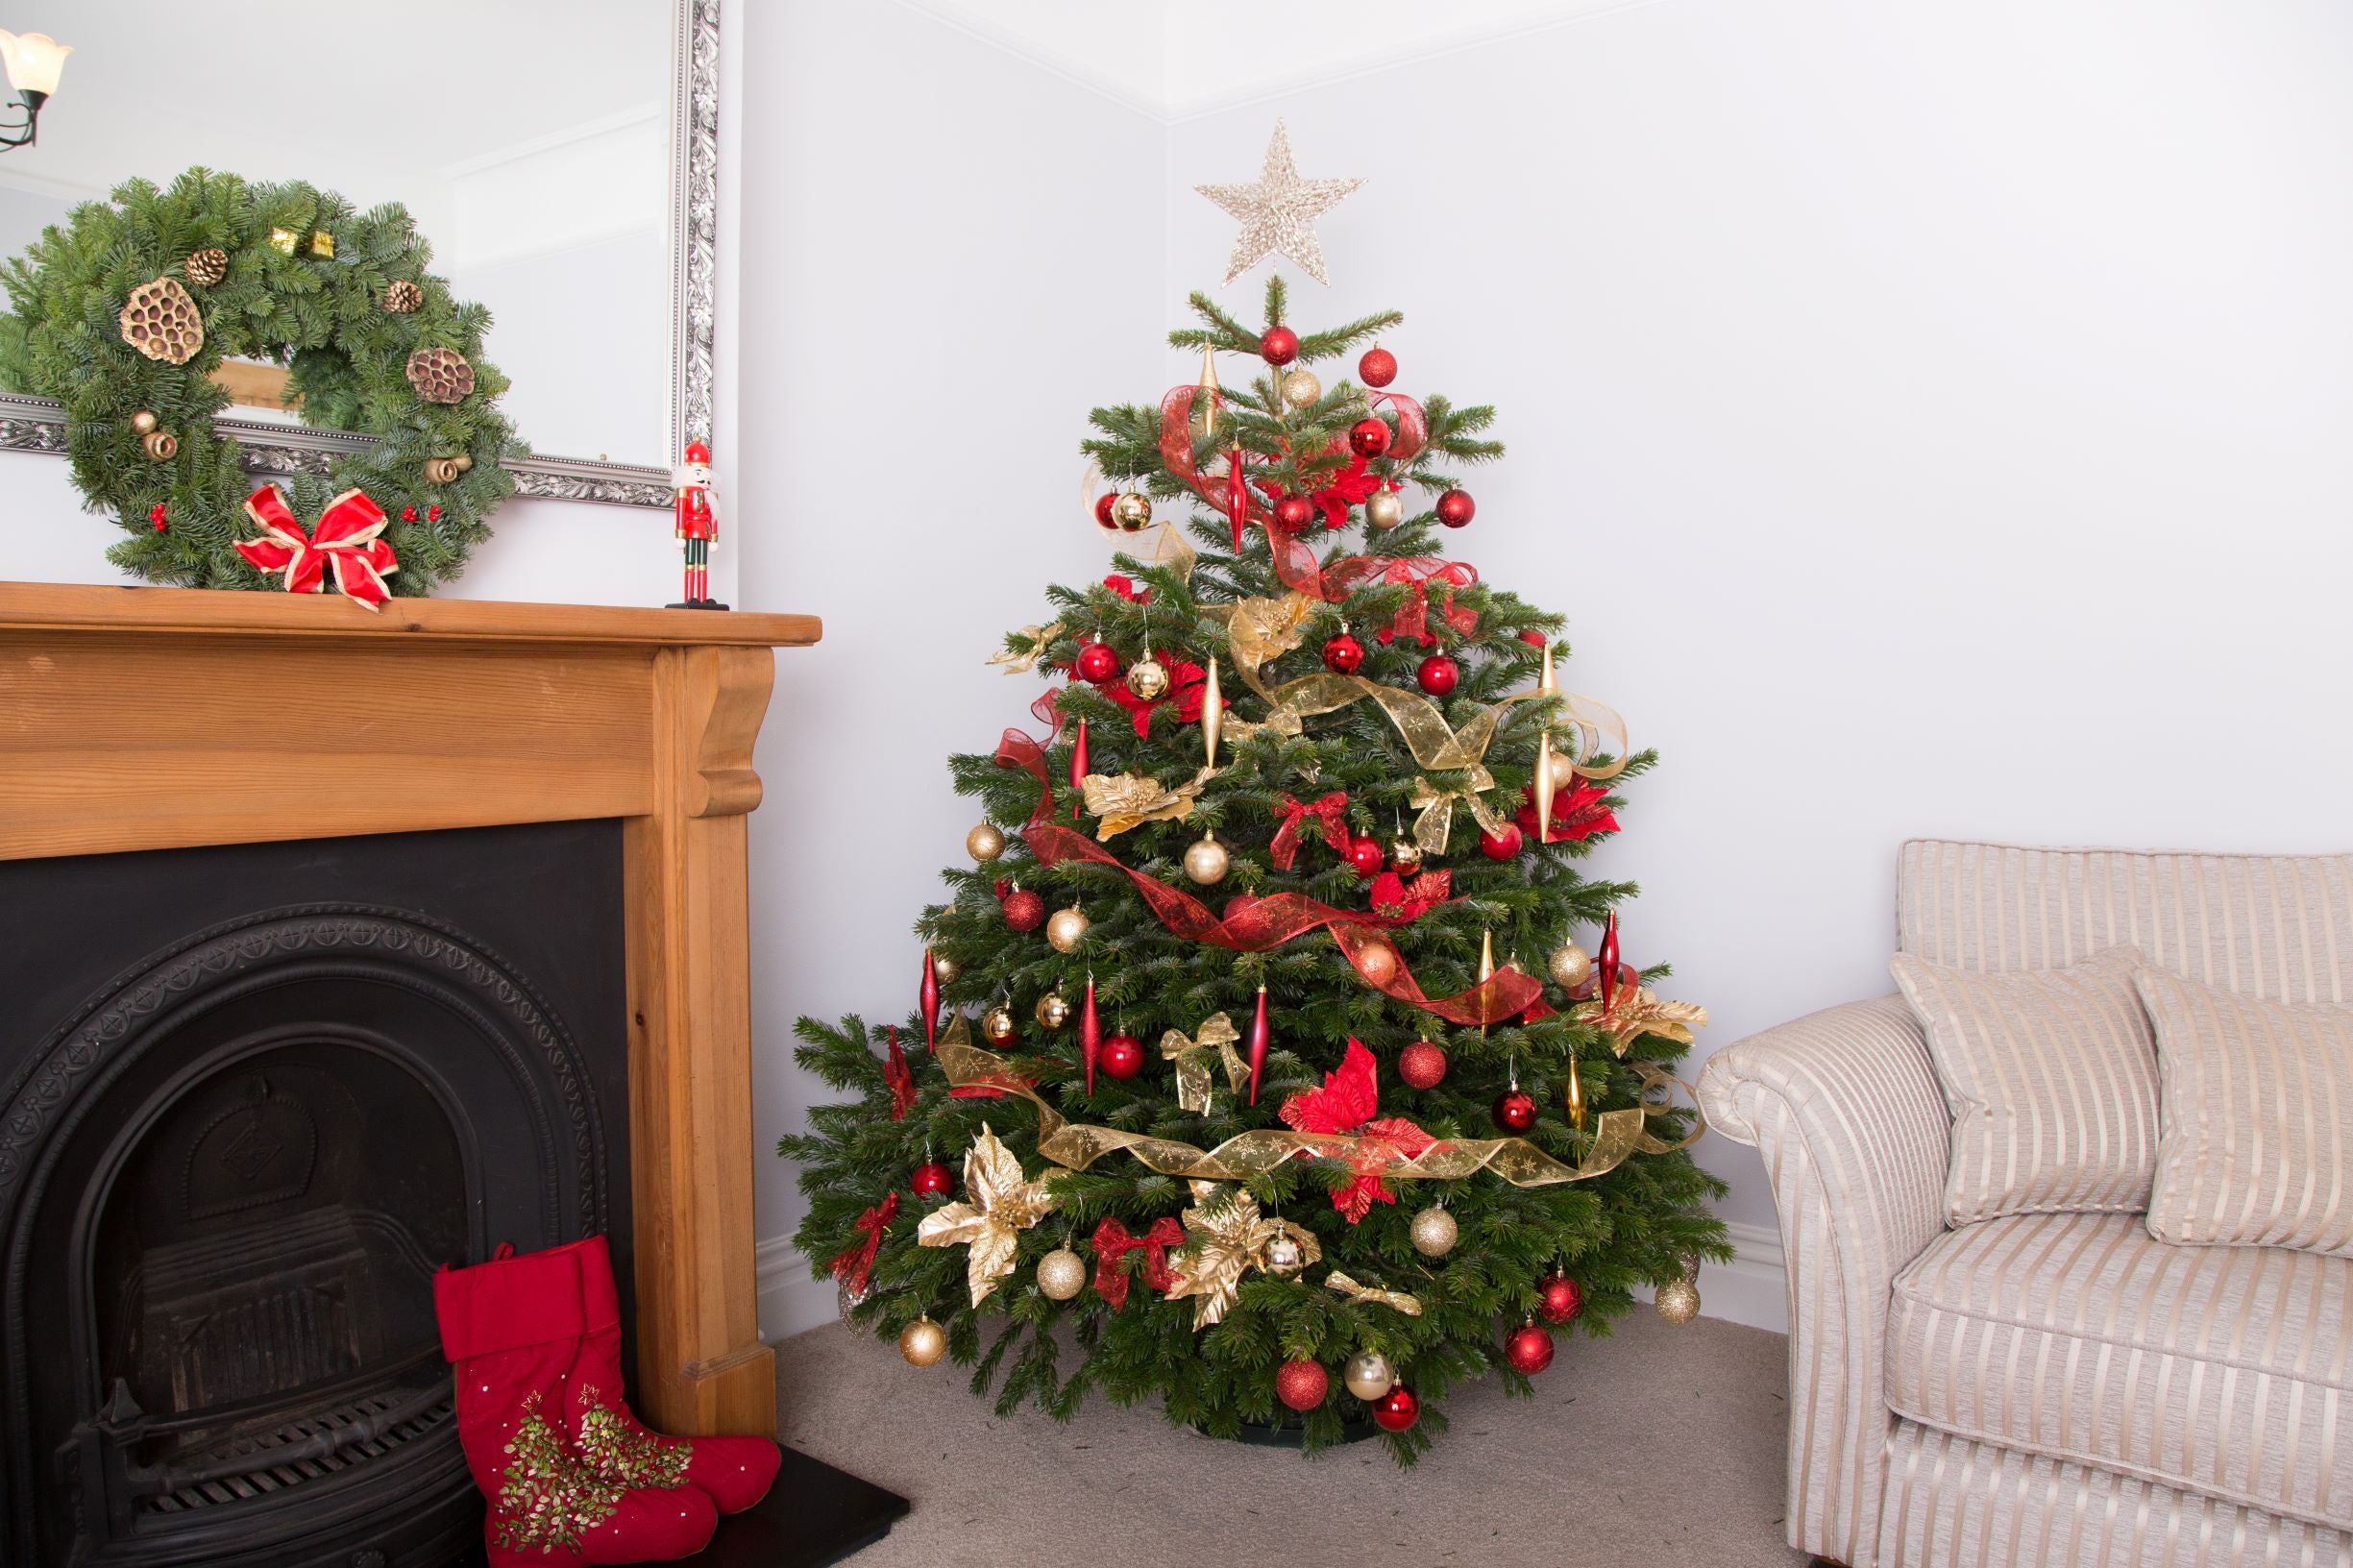 6ft Festive Decorated Christmas Tree from Pines and Needles